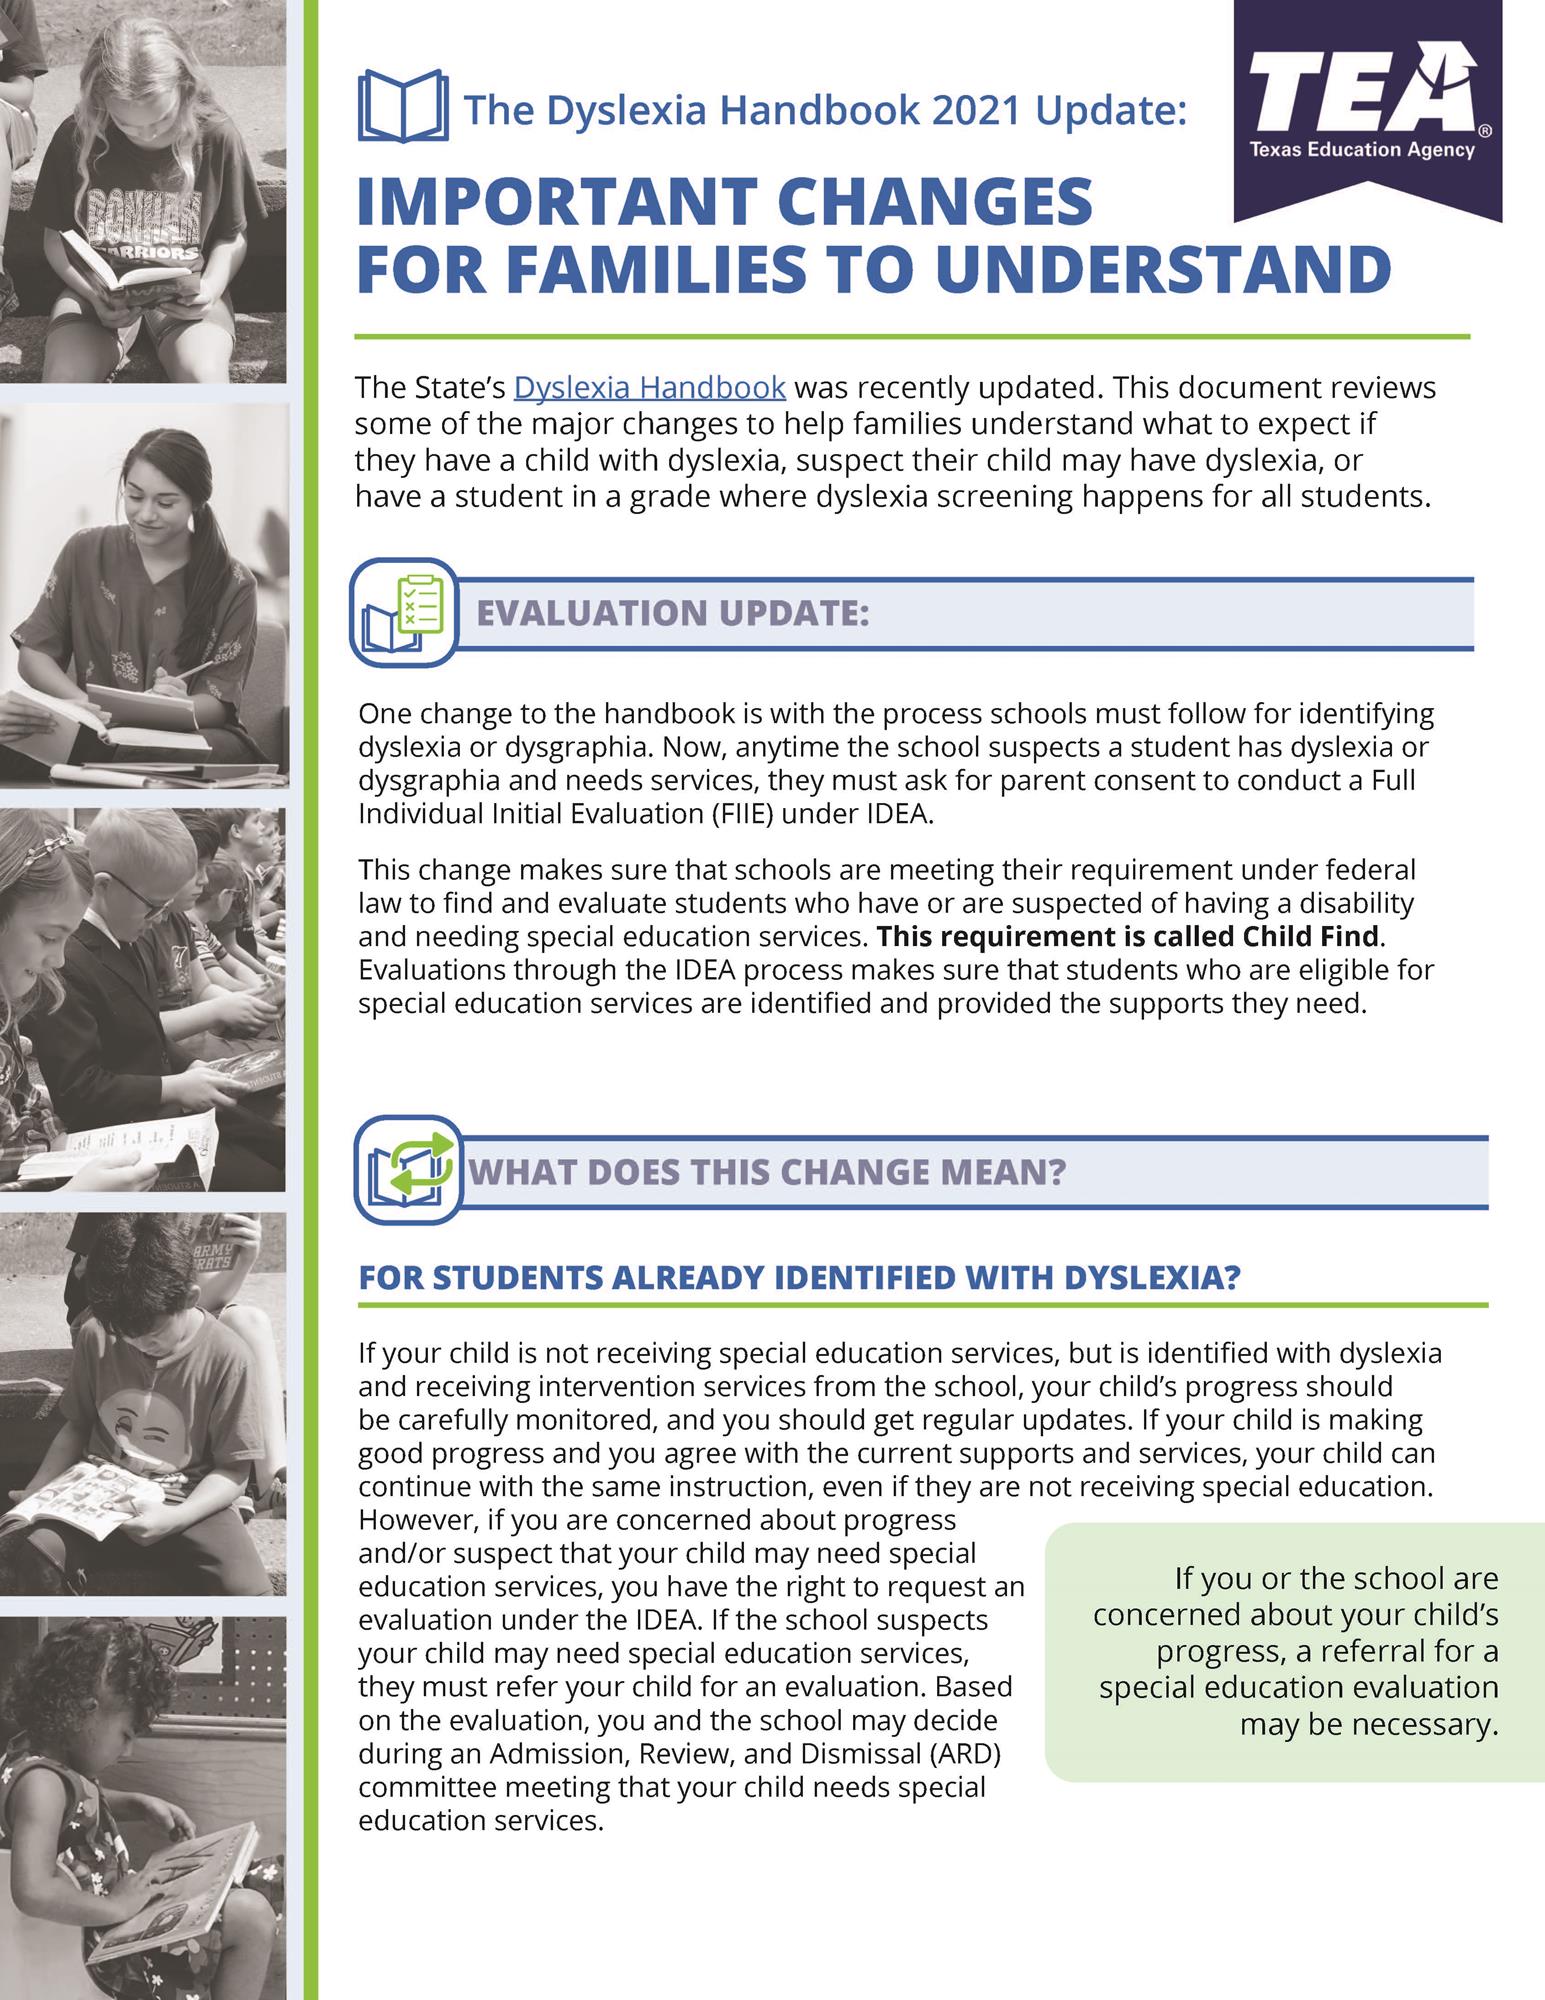 Important Changes for Families to Understand